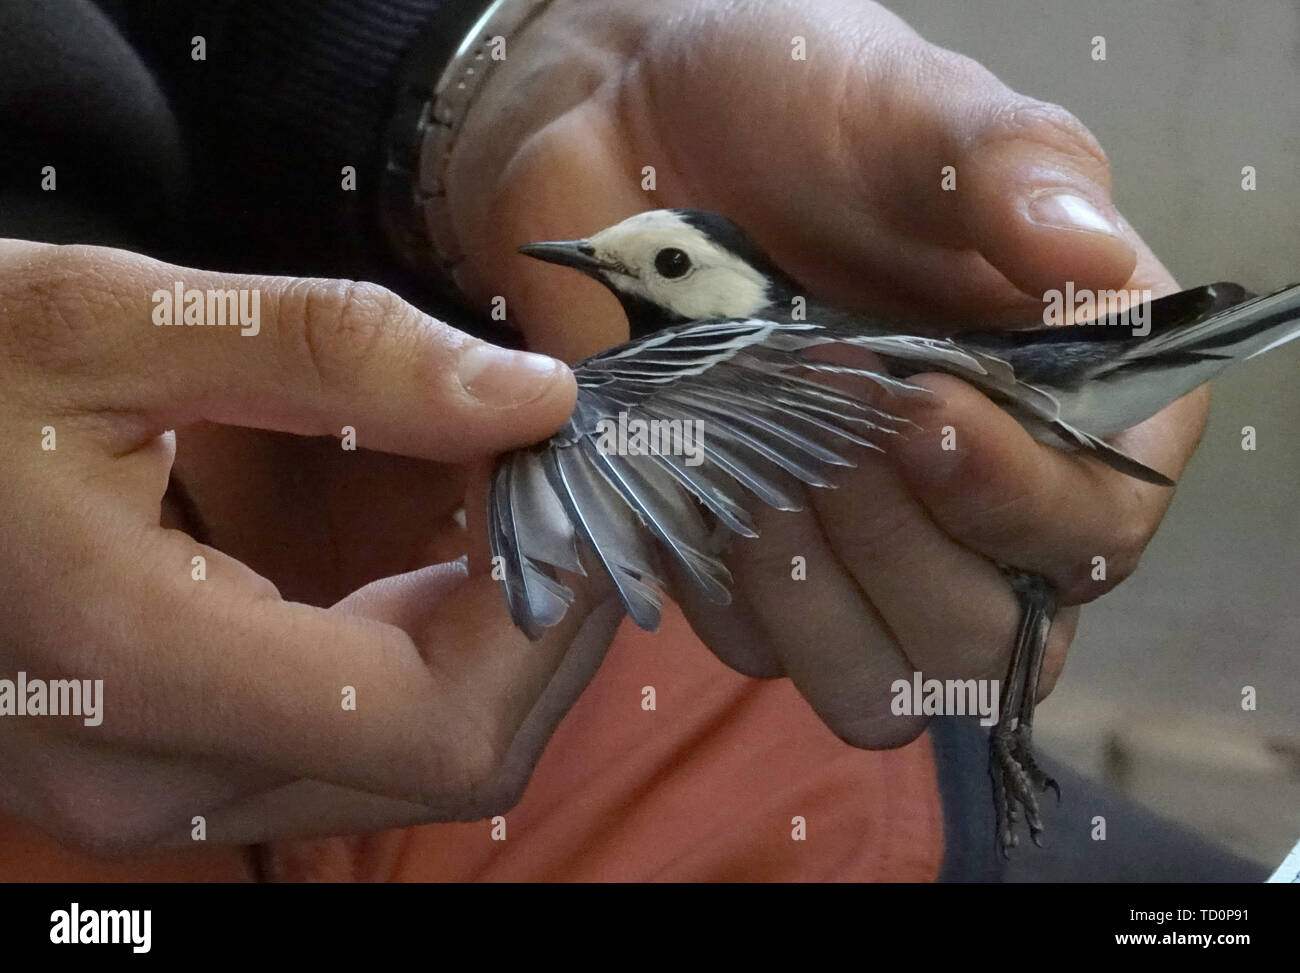 Helgoland, Germany. 14th May, 2019. A member of staff at the Institute for Bird Research investigates a captive wagtail. The IfV was founded as 'Vogelwarte Helgoland' on 1 April 1910 within the Prussian Biological Institute on Helgoland. In the meantime about one million migratory birds have been captured and ringed here. (Zu dpa ' The bird ringers of Helgoland') Credit: Carsten Rehder/dpa/Alamy Live News Stock Photo